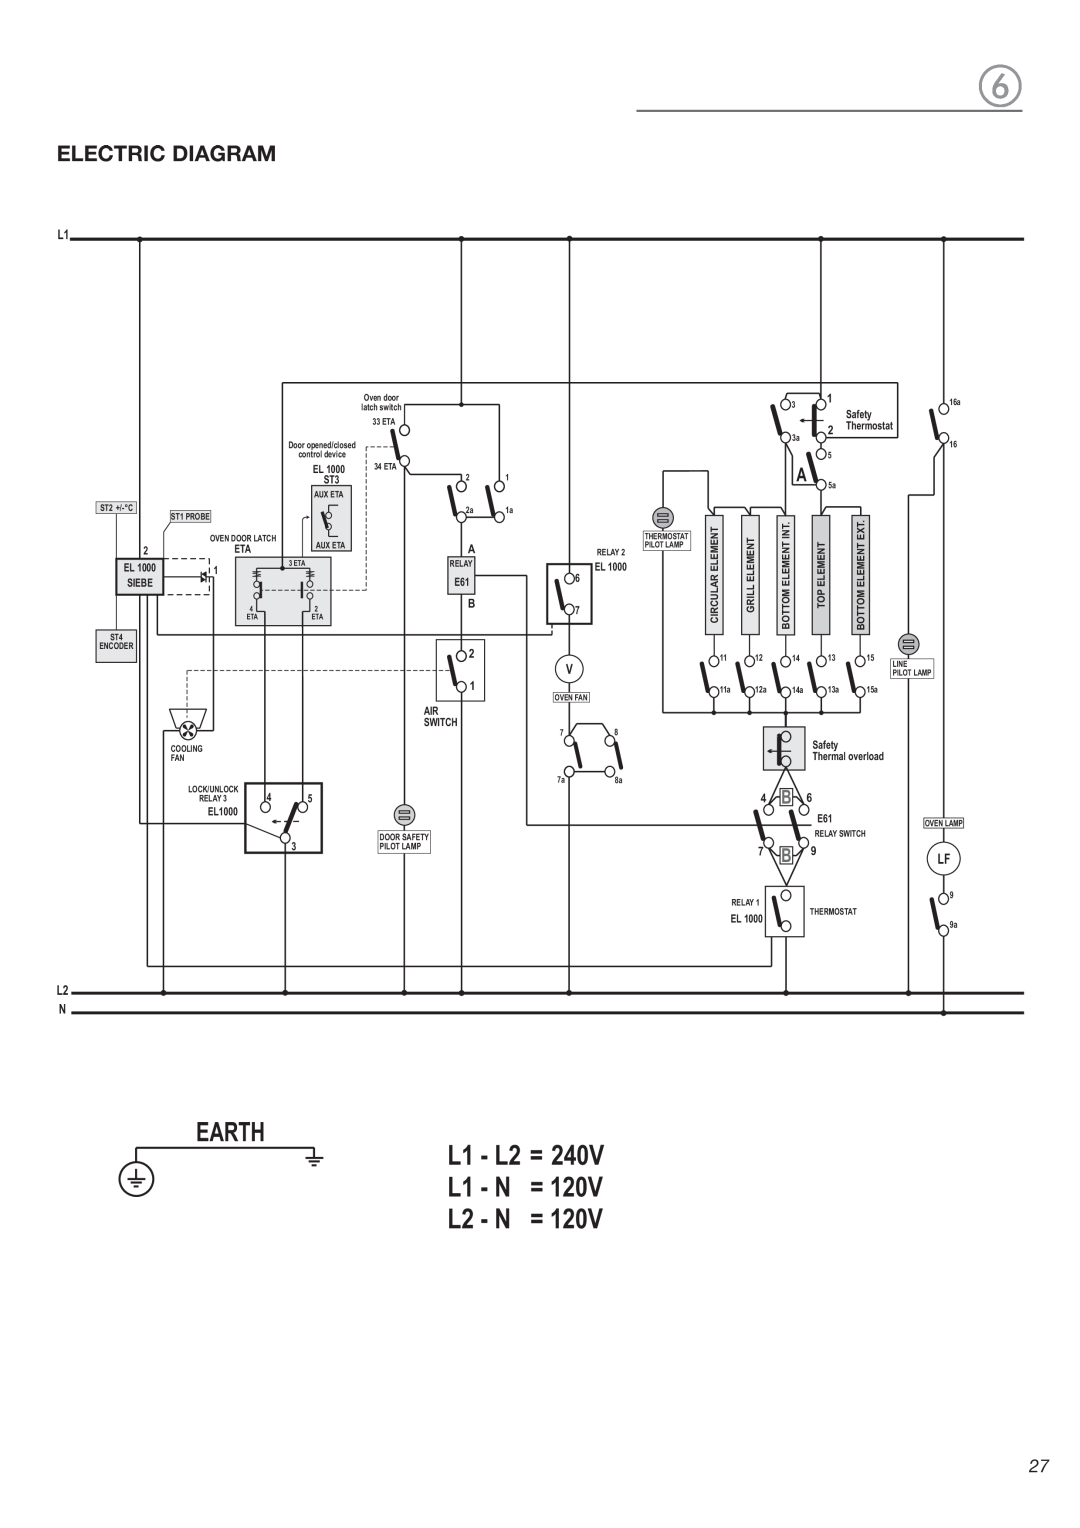 DeLonghi 24 E Electric Diagram, L1 - L2 =, L1 - N, L2 - N, Earth, Safety, Thermostat, Switch, Thermal overload, EL1000 